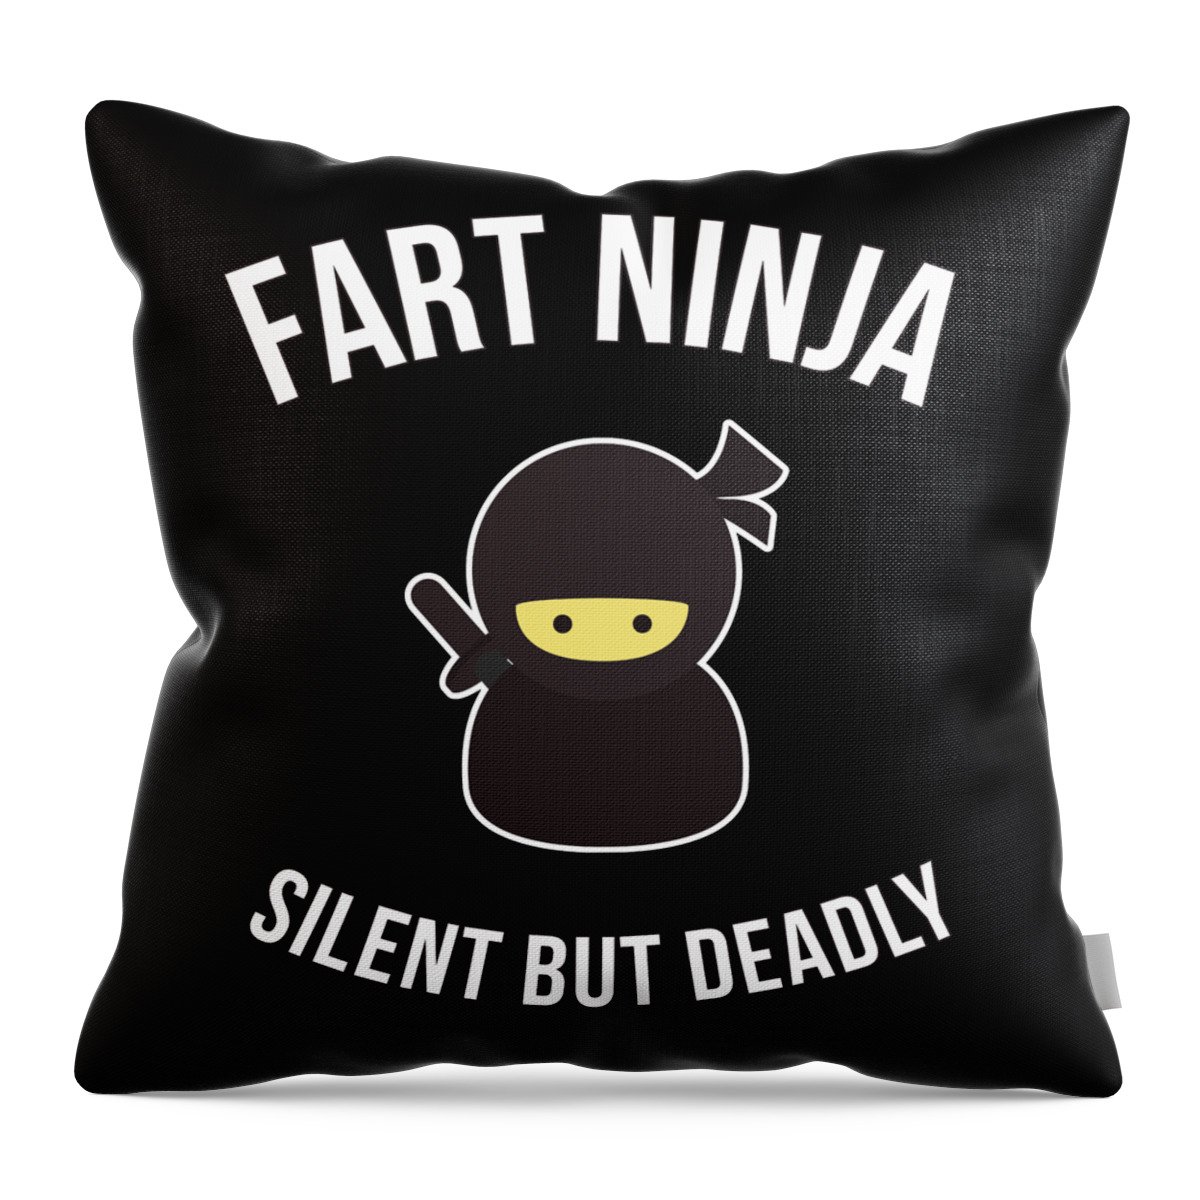 Funny Throw Pillow featuring the digital art Fart Ninja Silent But Deadly by Flippin Sweet Gear